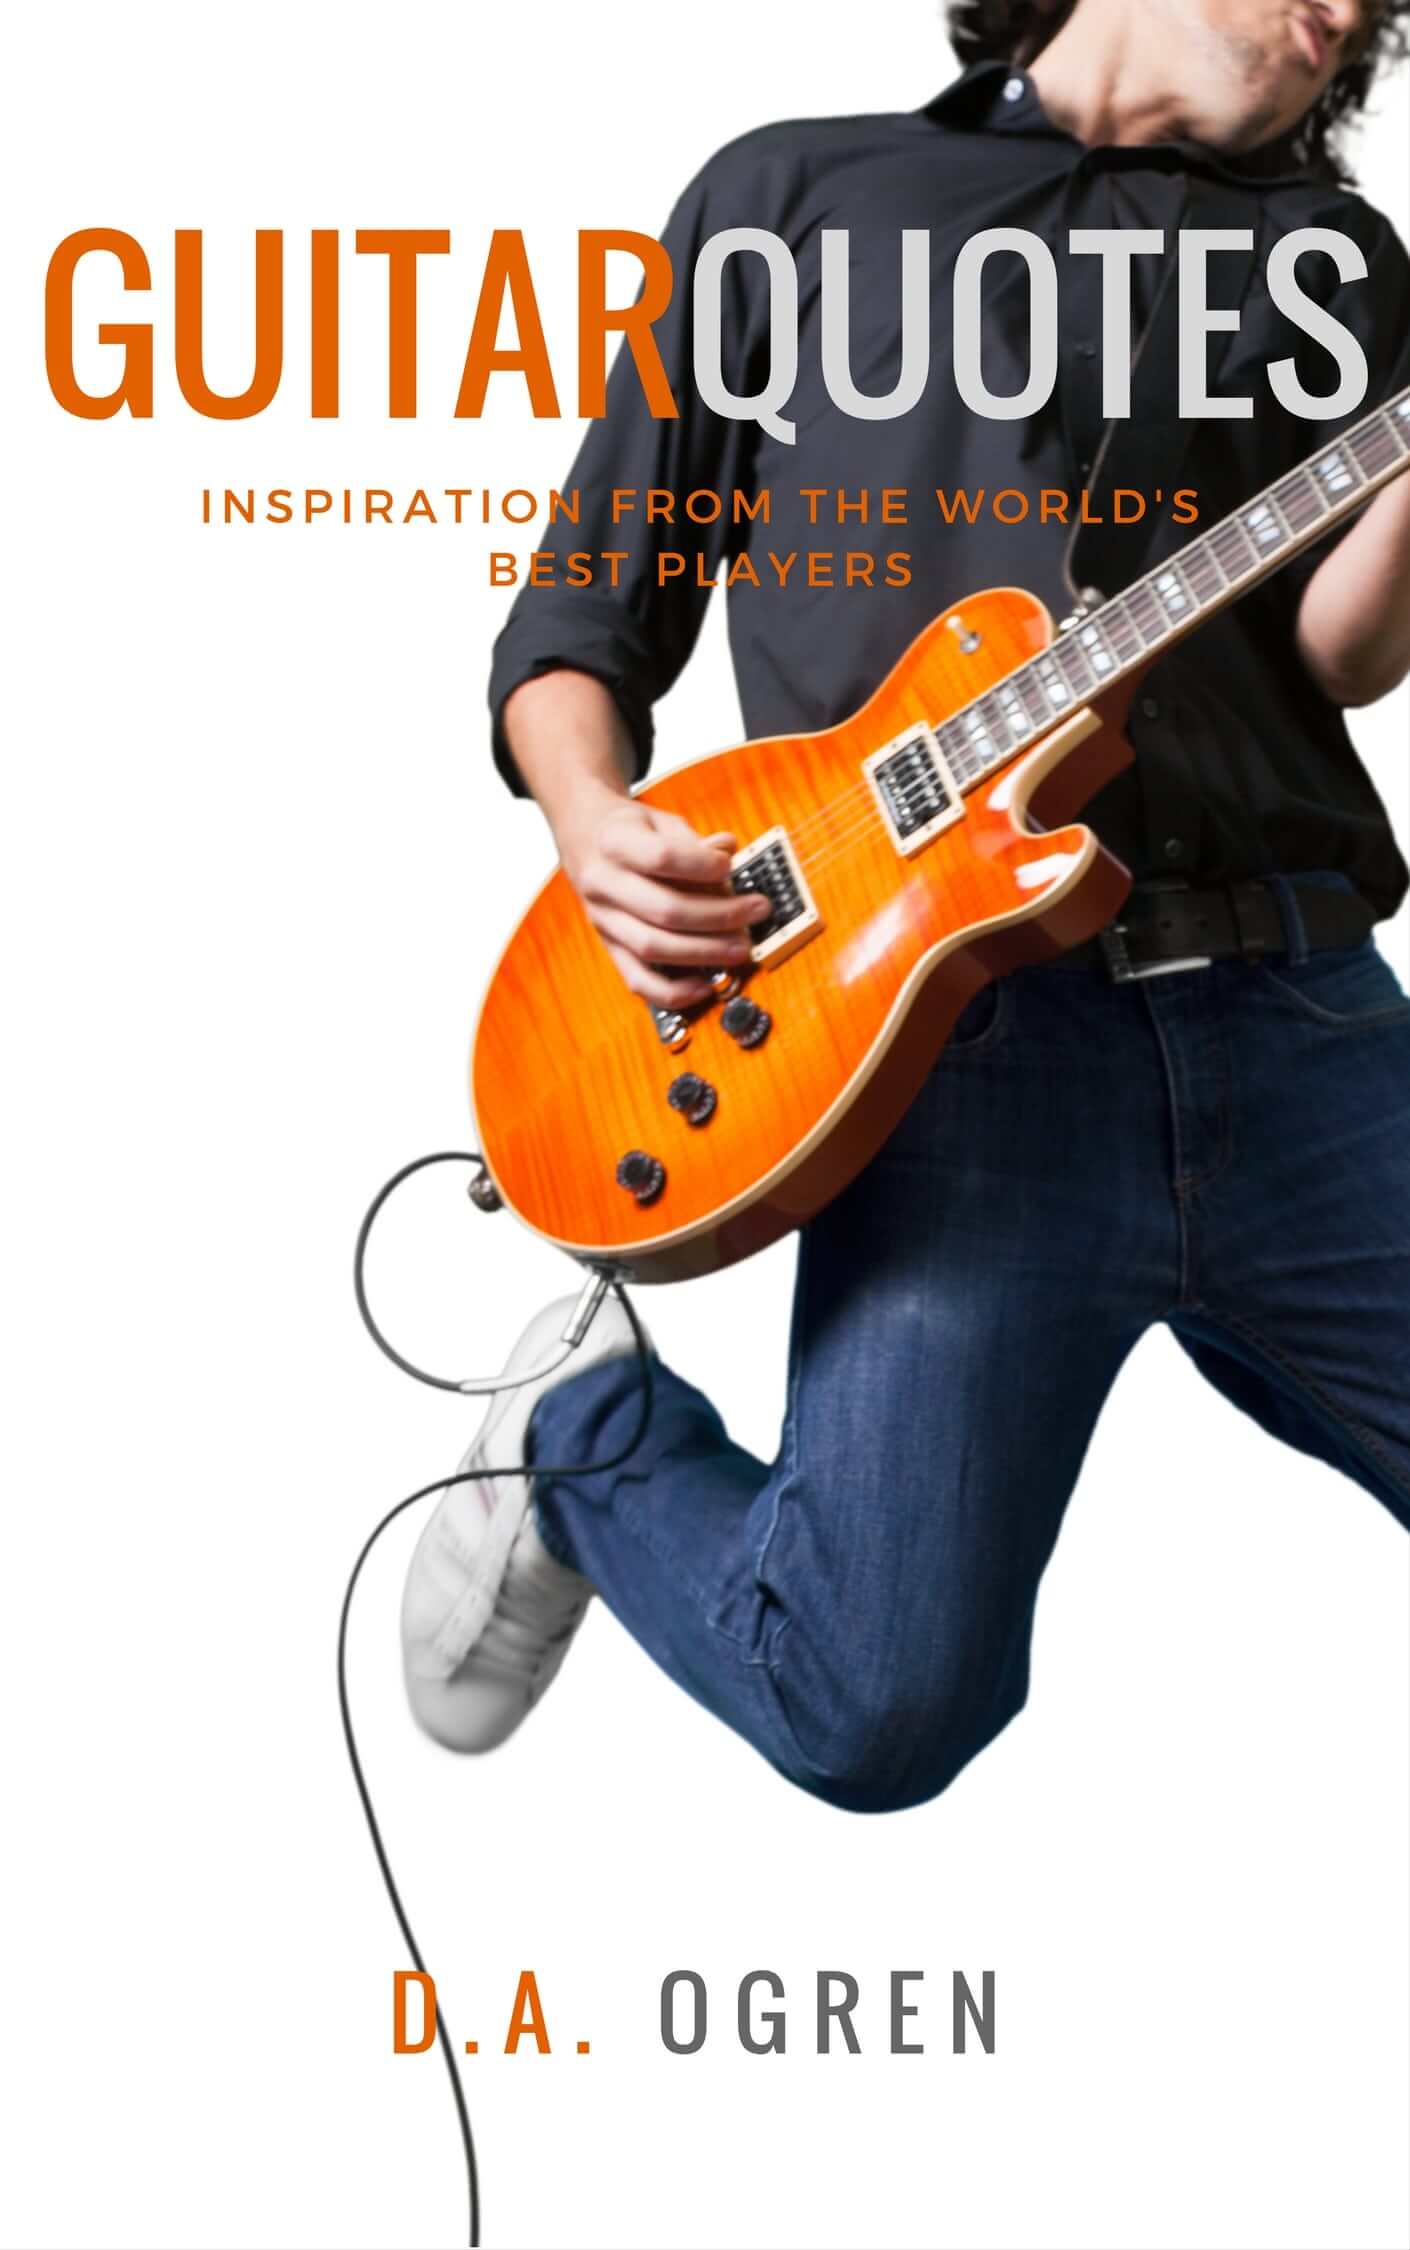 FREE: Guitar Quotes: Inspiration from the World’s Best Players by David A. Ogren